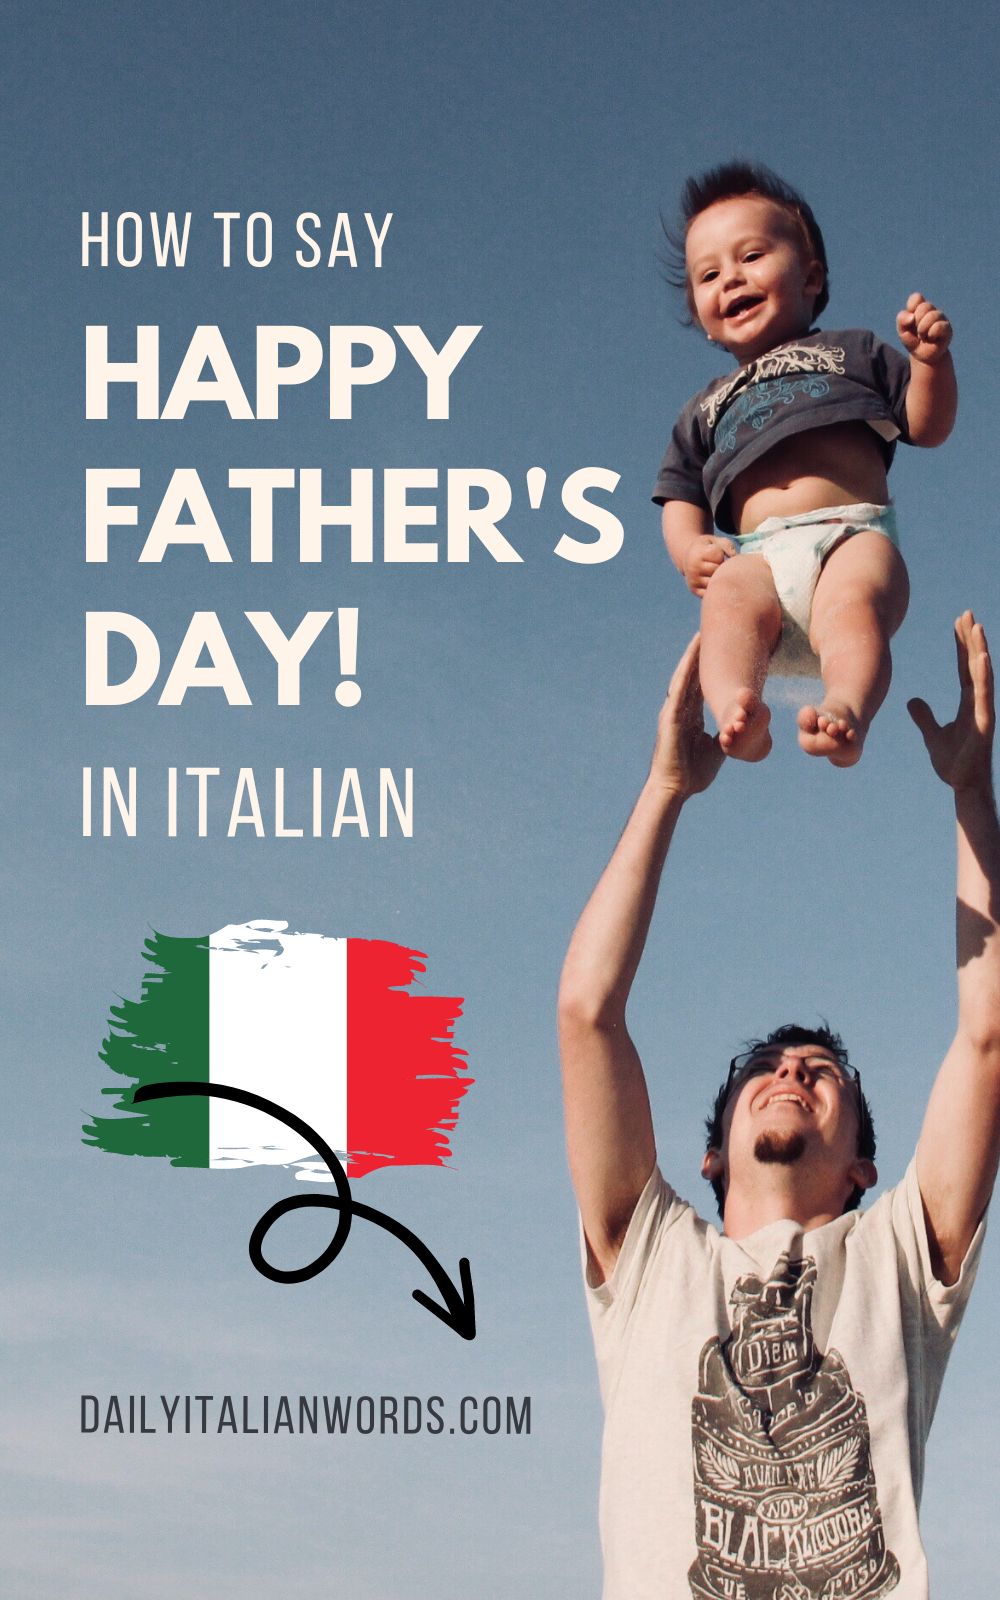 how to say happy father's day in italian